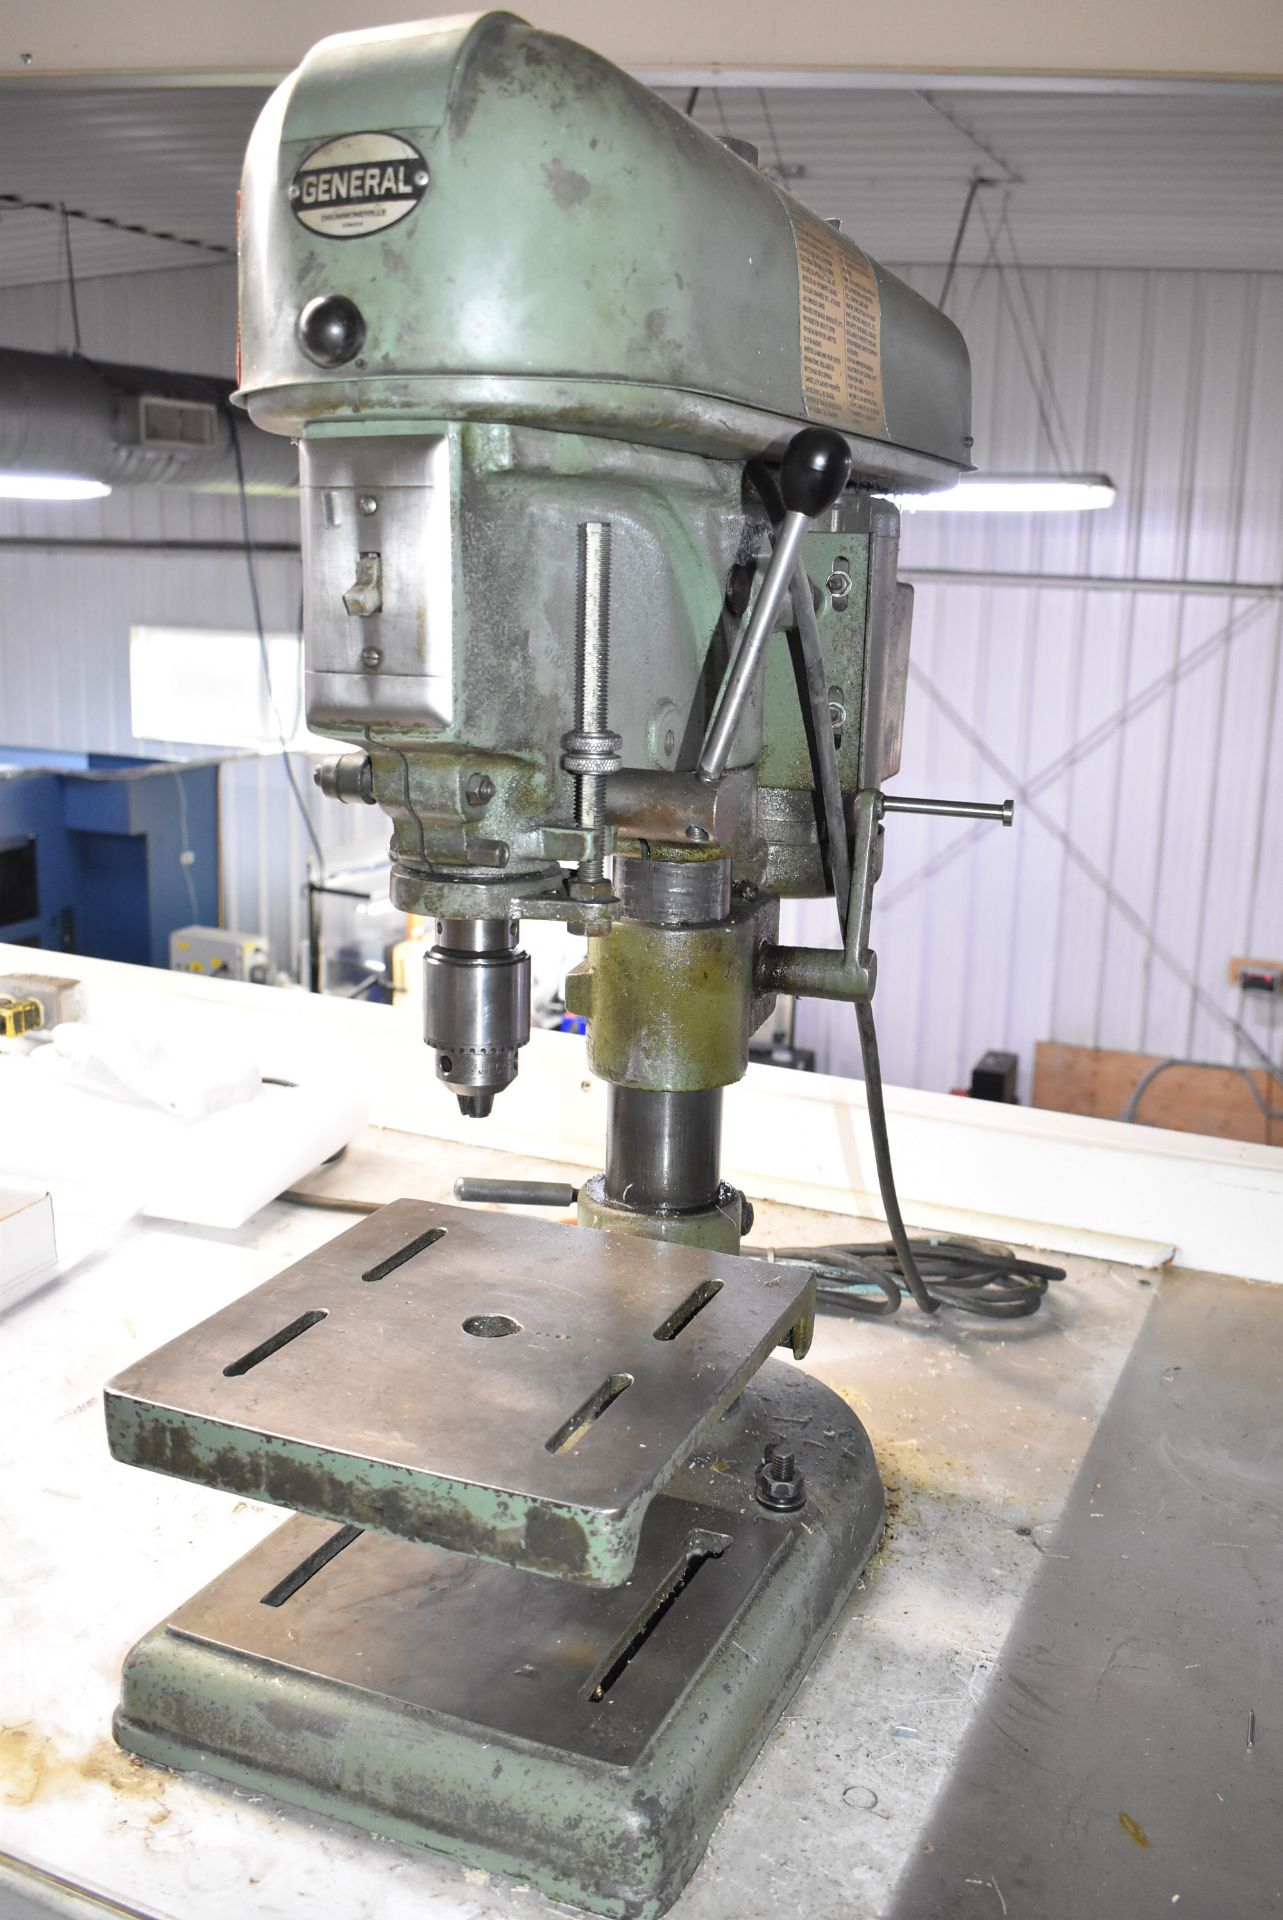 GENERAL 340 DRILL PRESS WITH 10" X 11" TABLE, _ HP MOTOR, 115V/1PH/60HZ, S/N G8230 [RIGGING FEE - Image 3 of 5